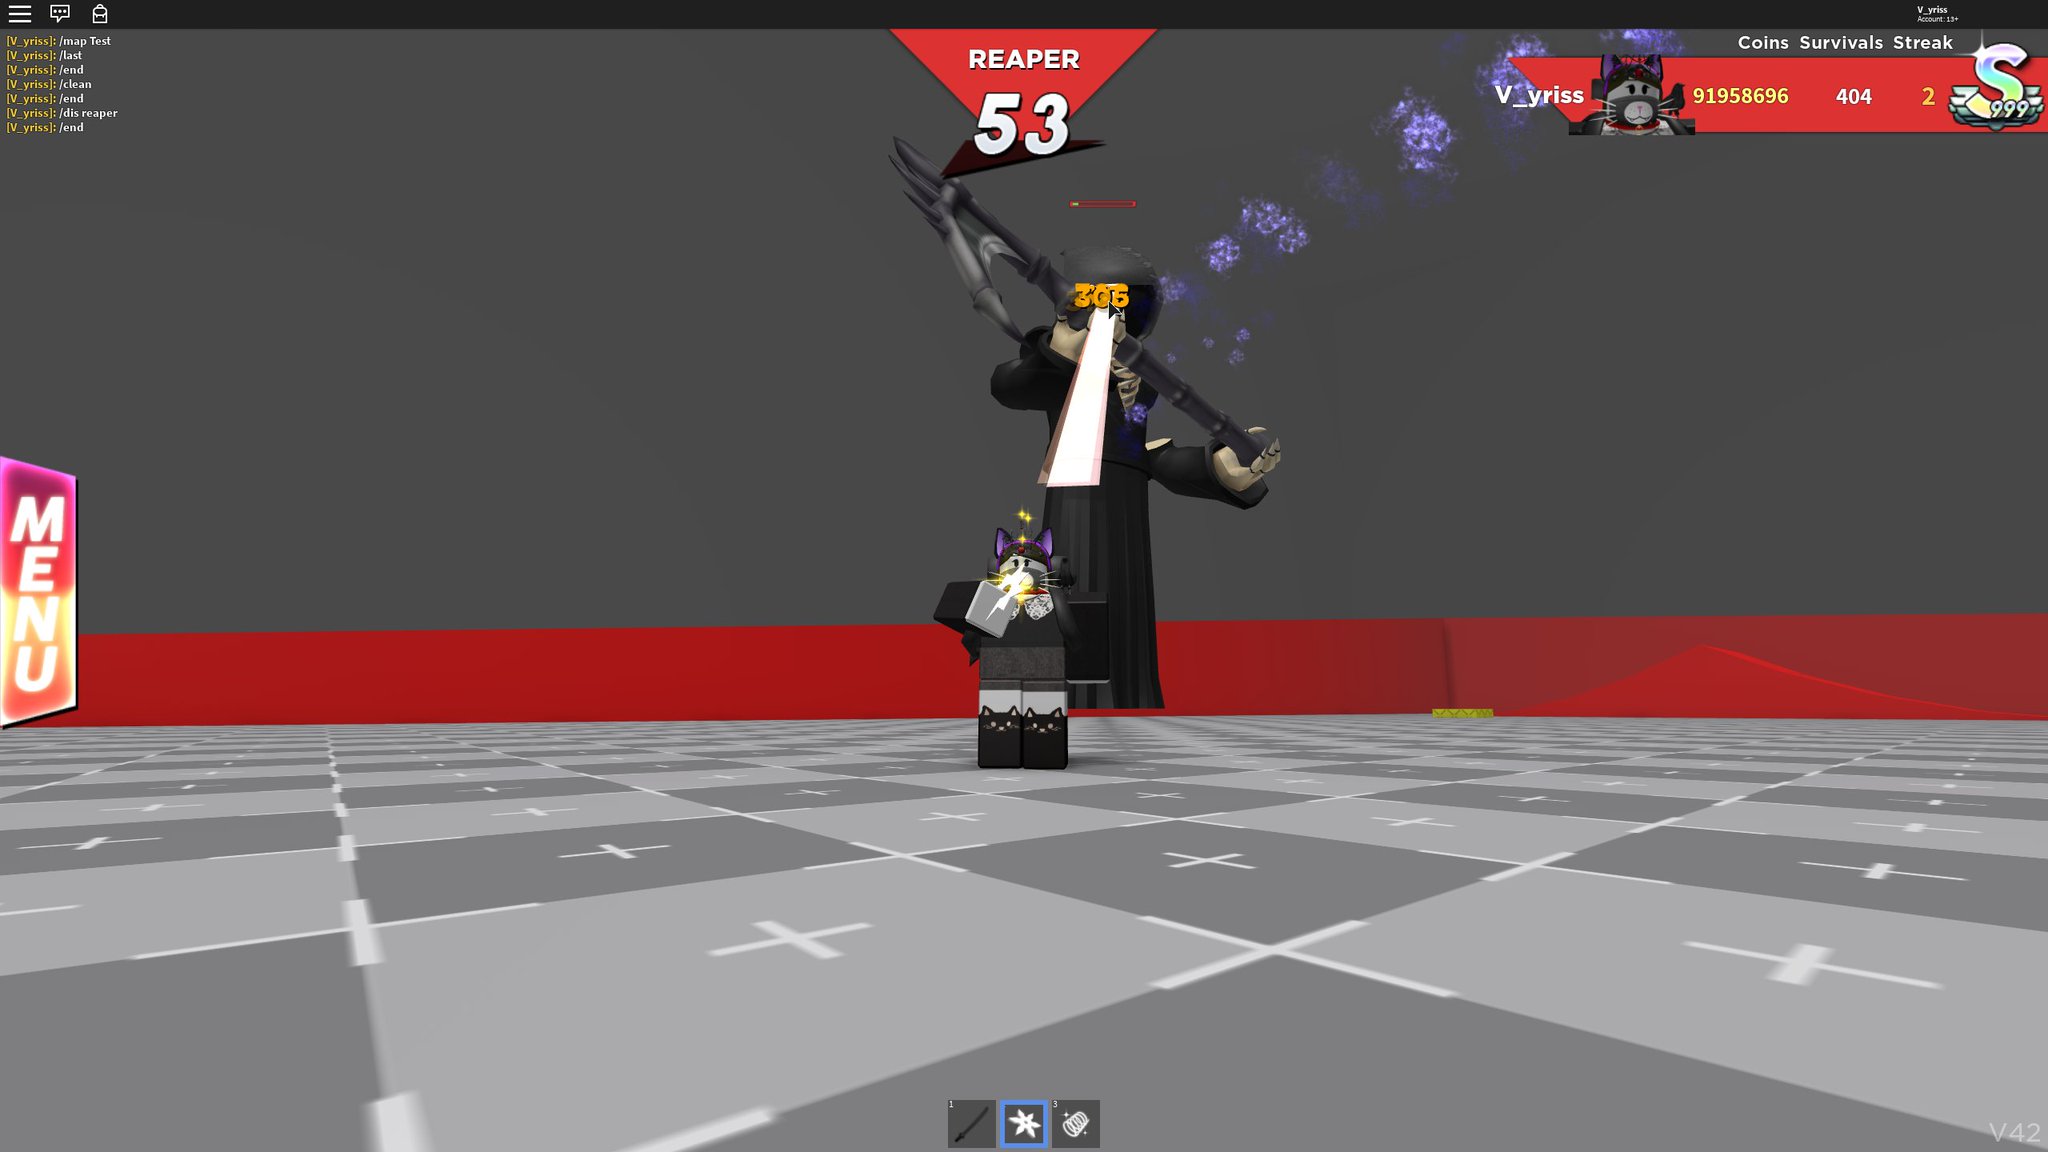 Survive The Disasters 2 Working Pa Twitter Boss Drops - survive epic disasters roblox player